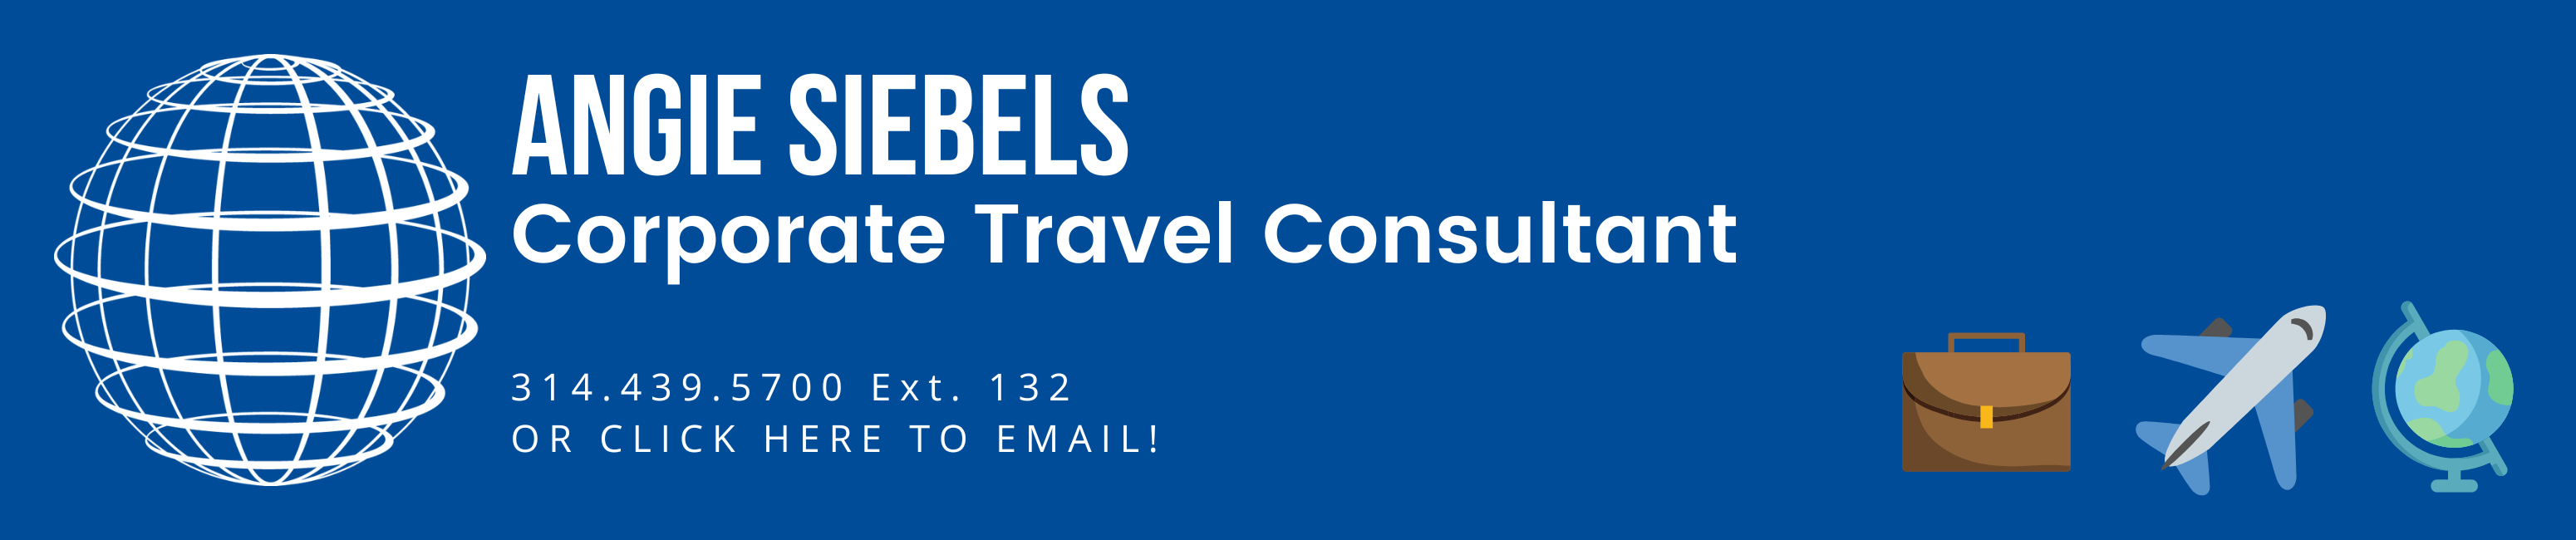 angie siebels corporate travel consultant st. louis missouri brentwood travel